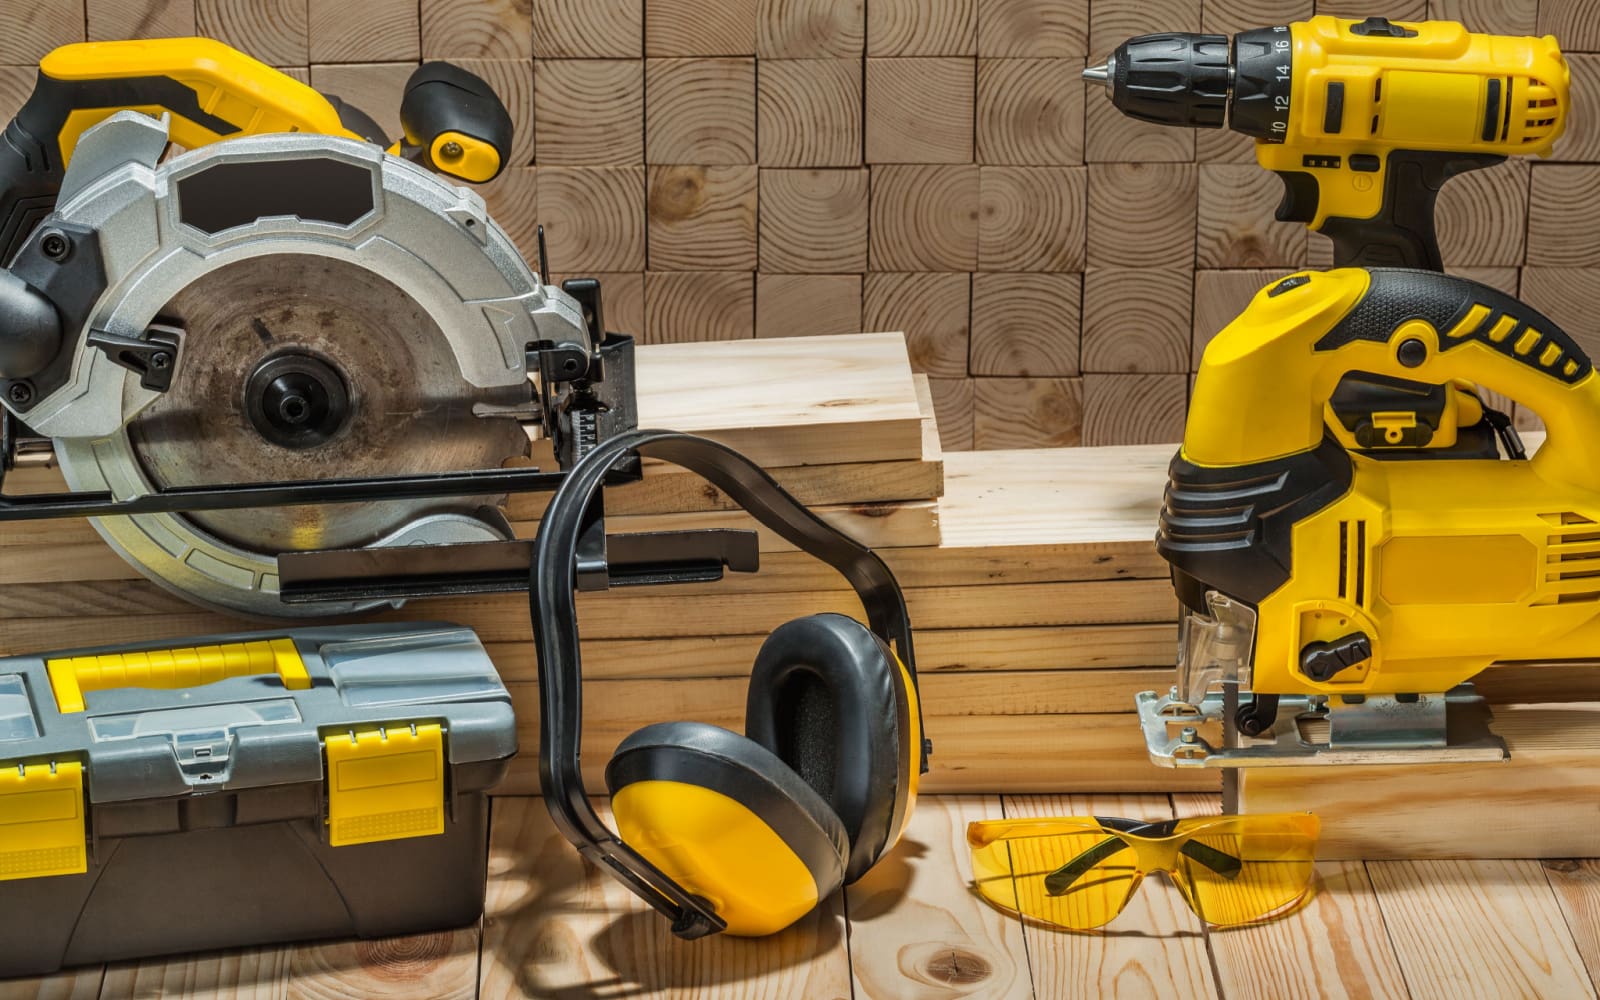 The 19 Types of Power Tools to Have in 2023